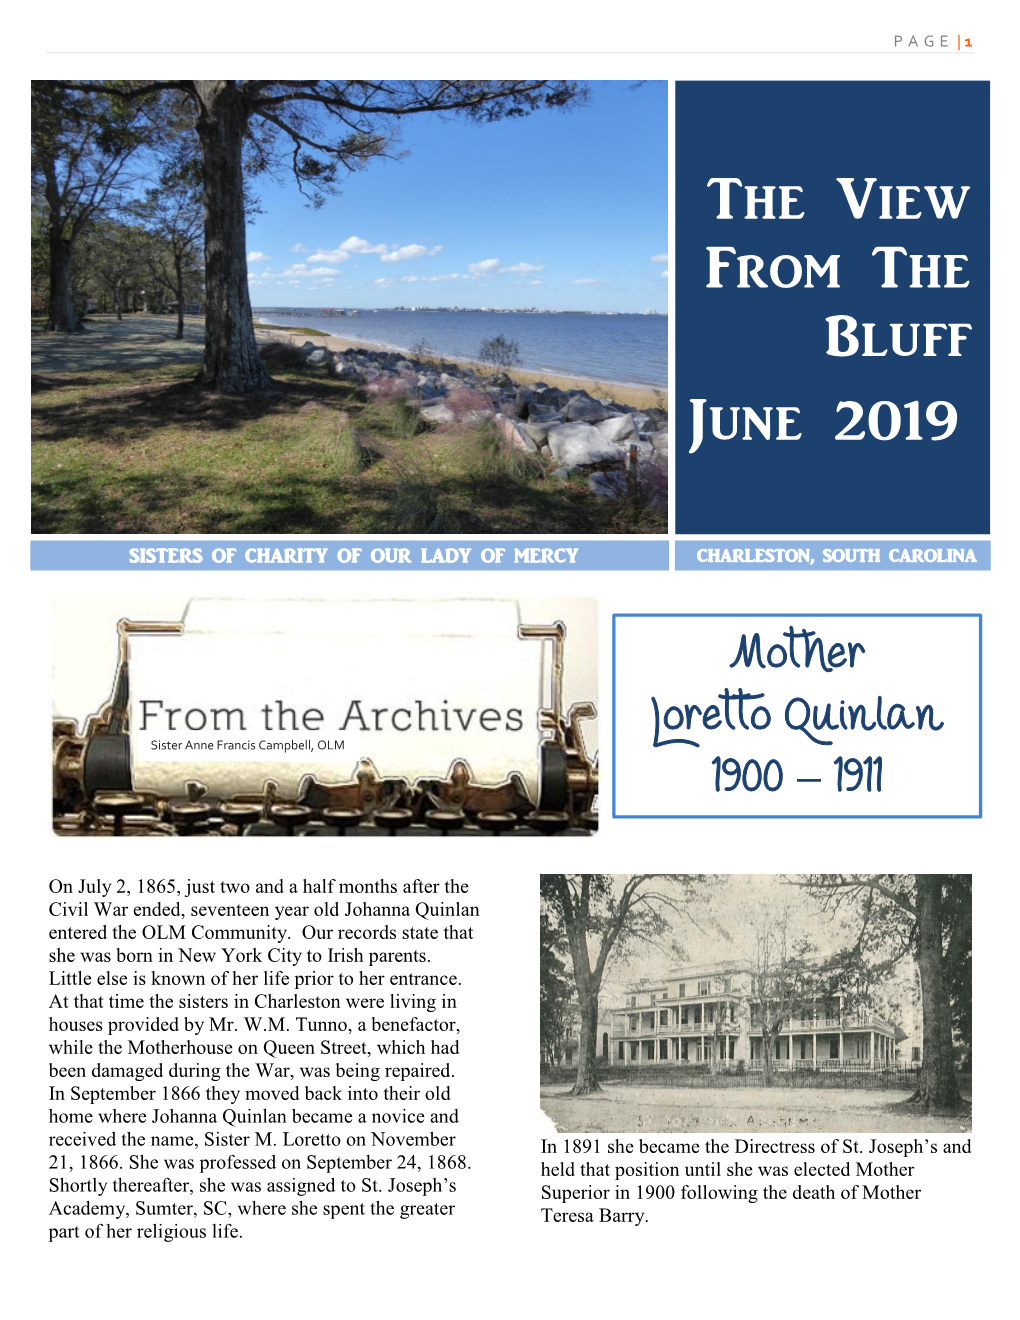 The View from the Bluff June 2019